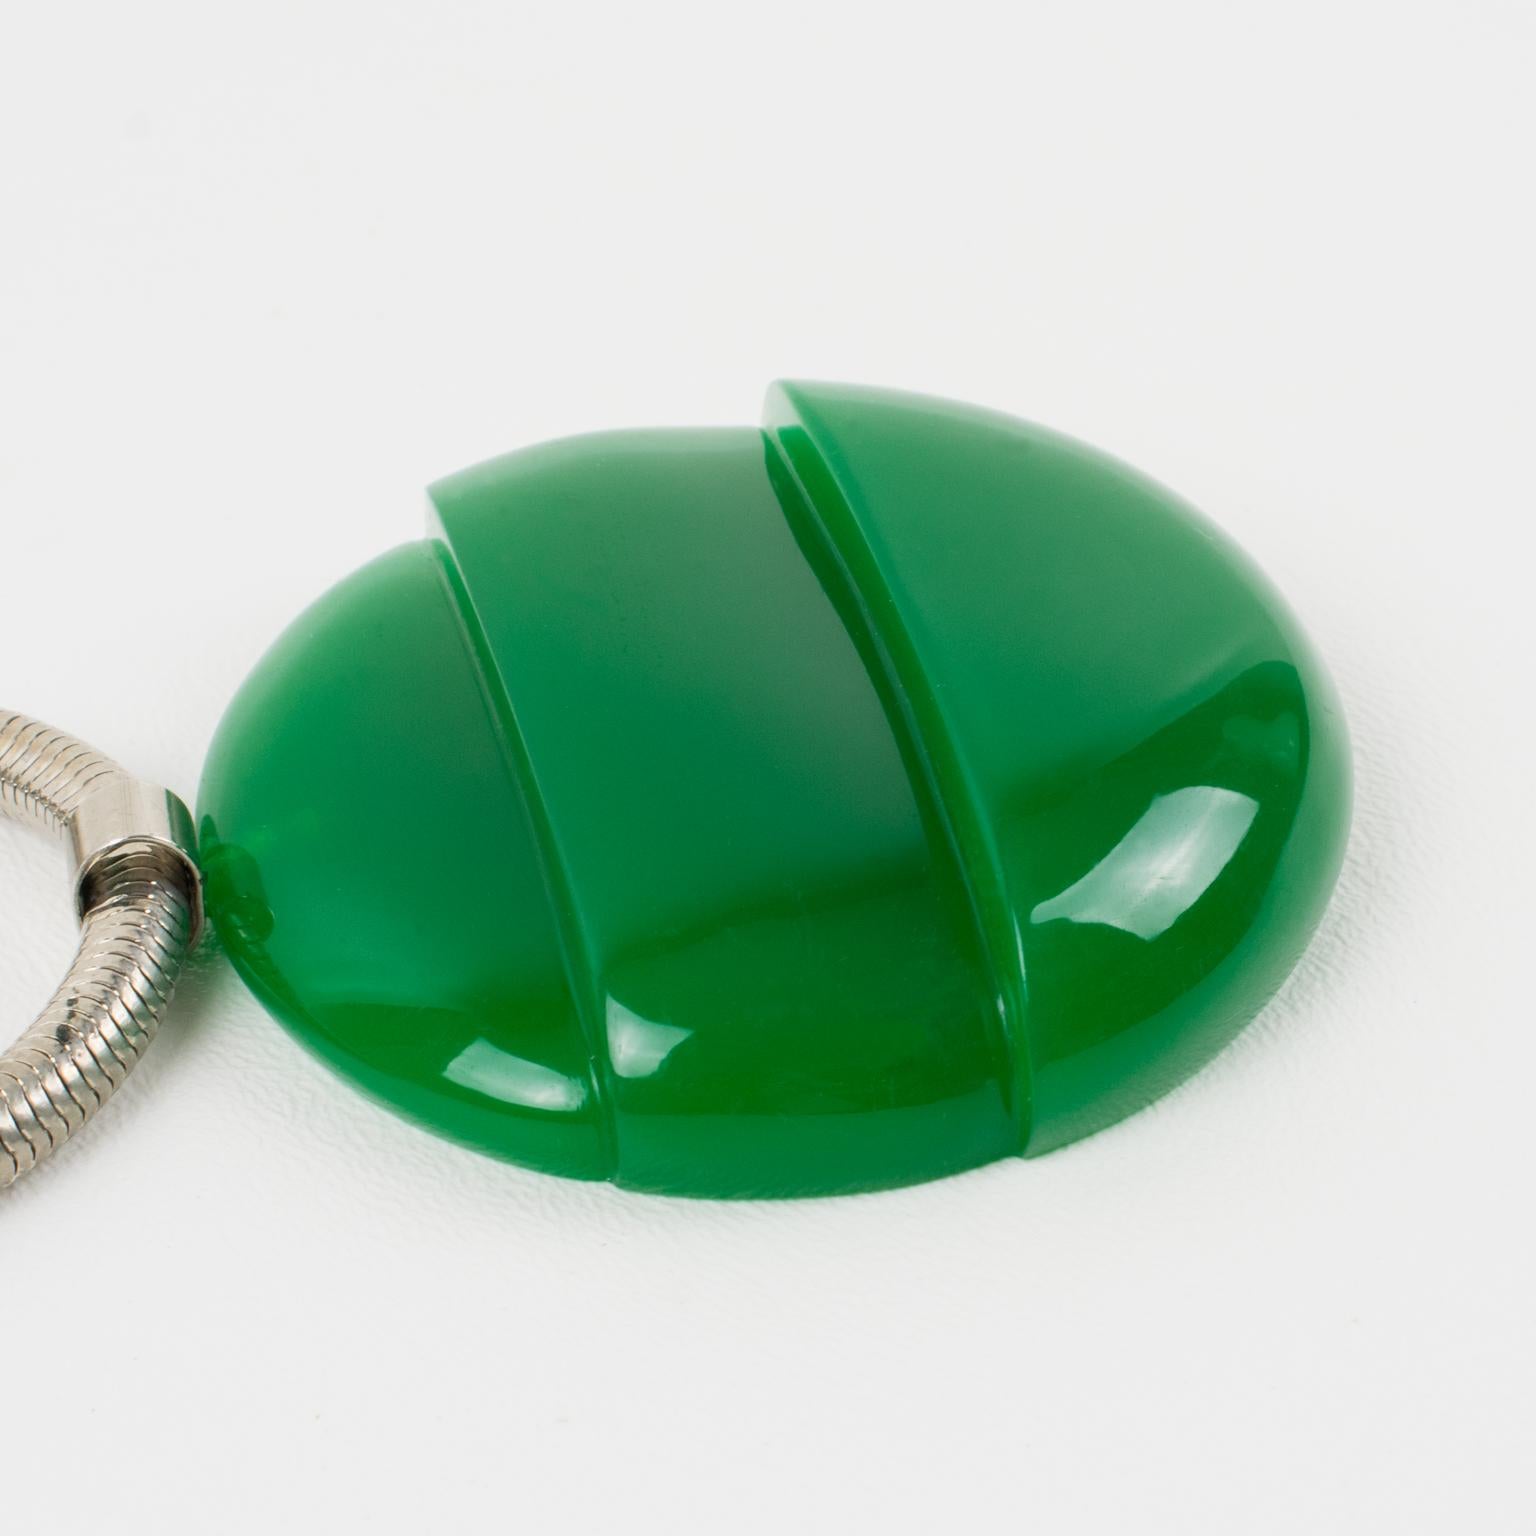 Lanvin Paris Modernist Green Lucite Medallion Necklace with Snake Chain, 1970s For Sale 2